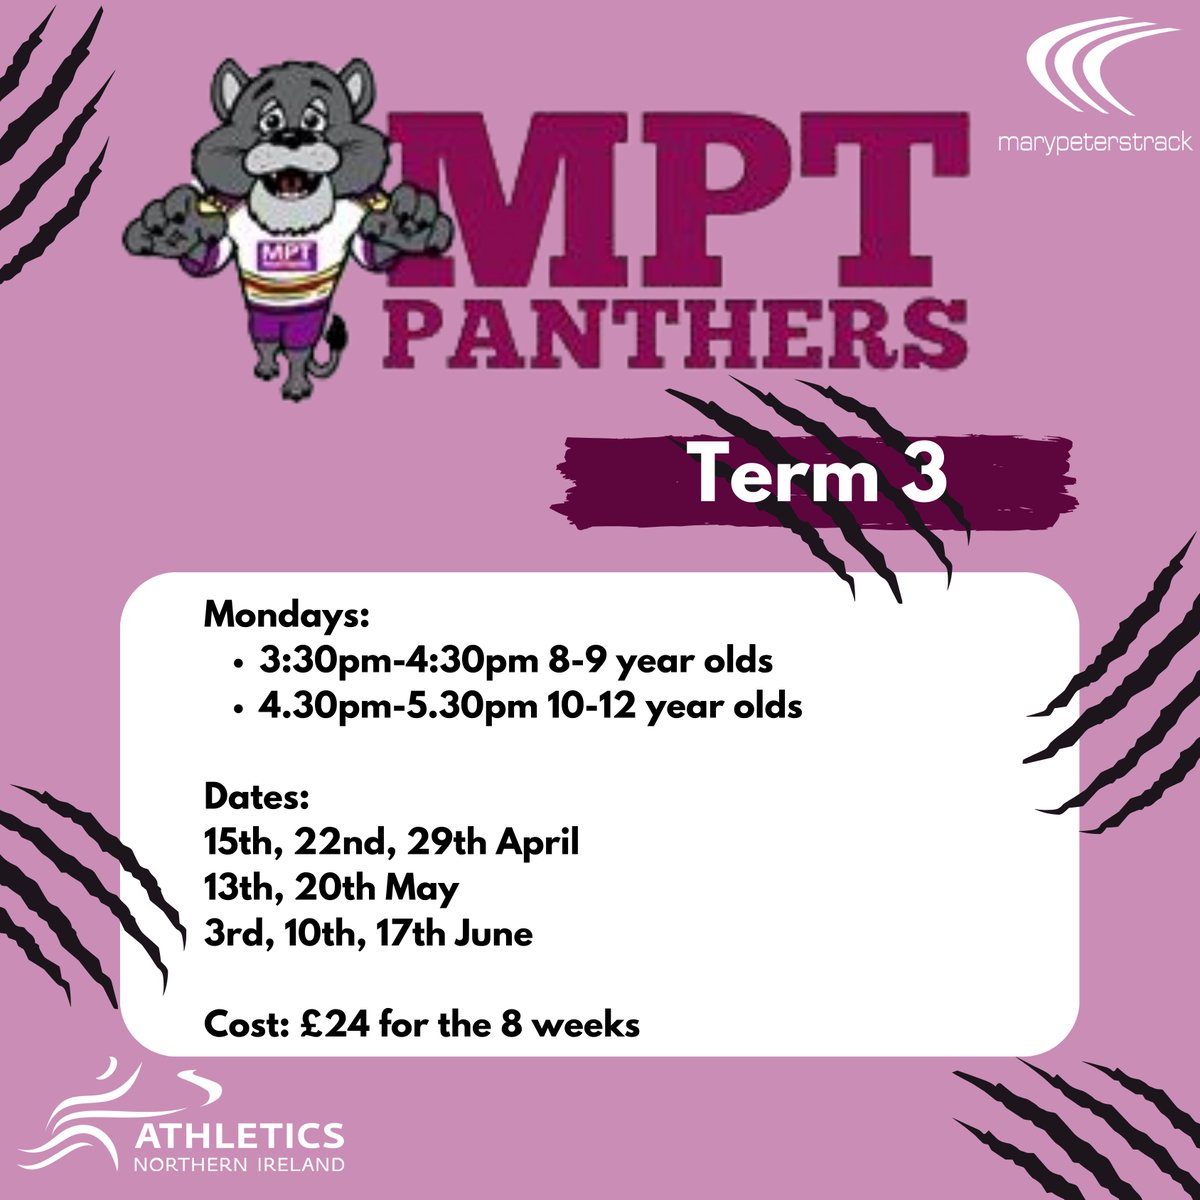 🐾 It's Not Too Late to Sign Up! Sign your kids up to MPT Panthers next week 👇 athleticsni.org/Fixtures/MPT-P… #MPTPanthers #AfterSchoolClub